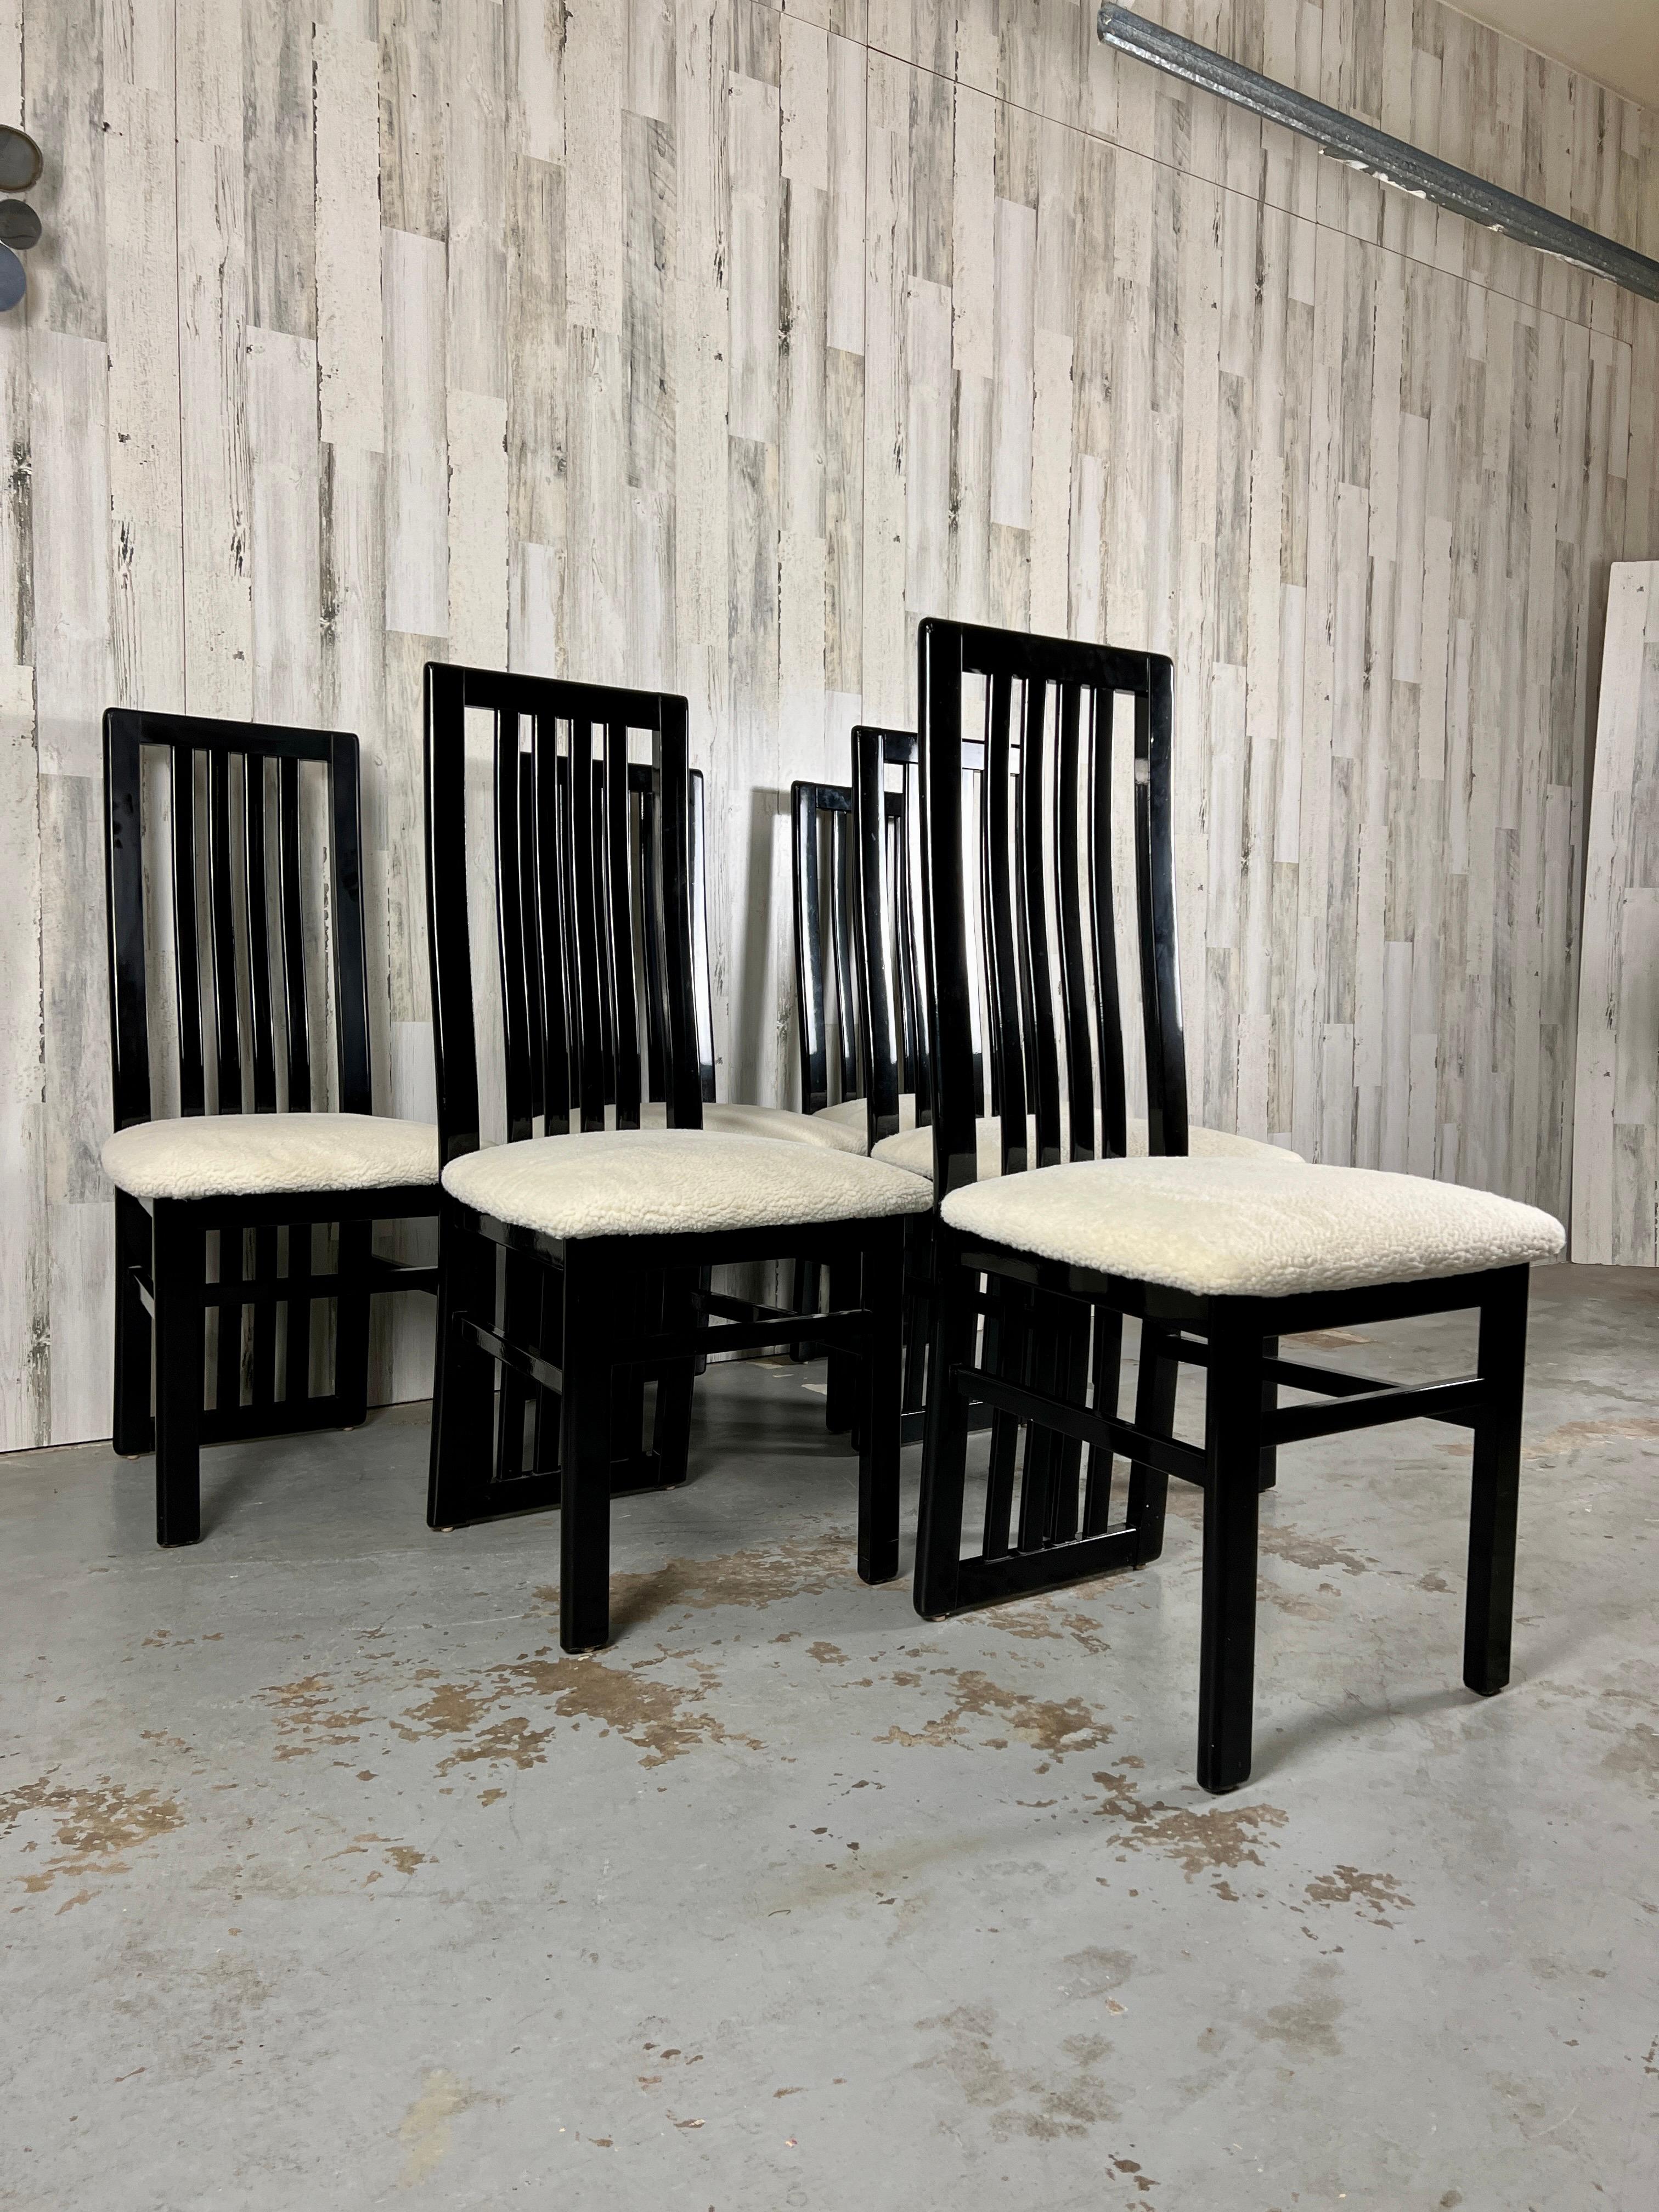 20th Century Italian Black Lacquer Dining Chairs by S.P.a Tonon